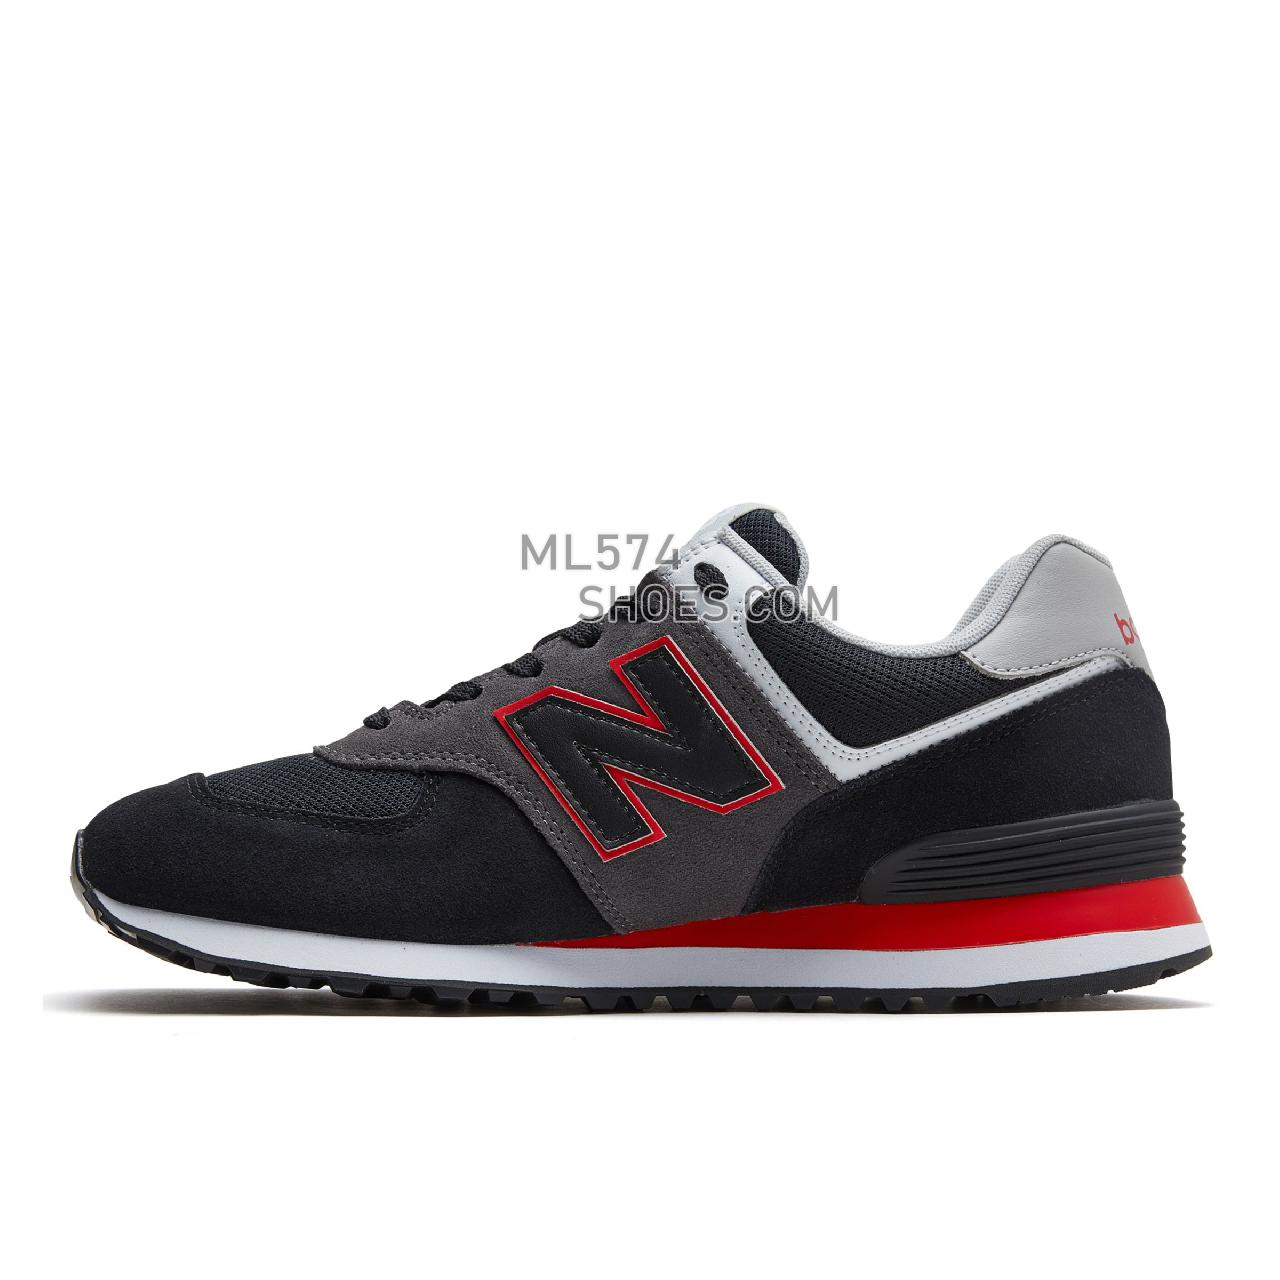 New Balance 574v2 - Men's Classic Sneakers - Black with Velocity Red - ML574SM2